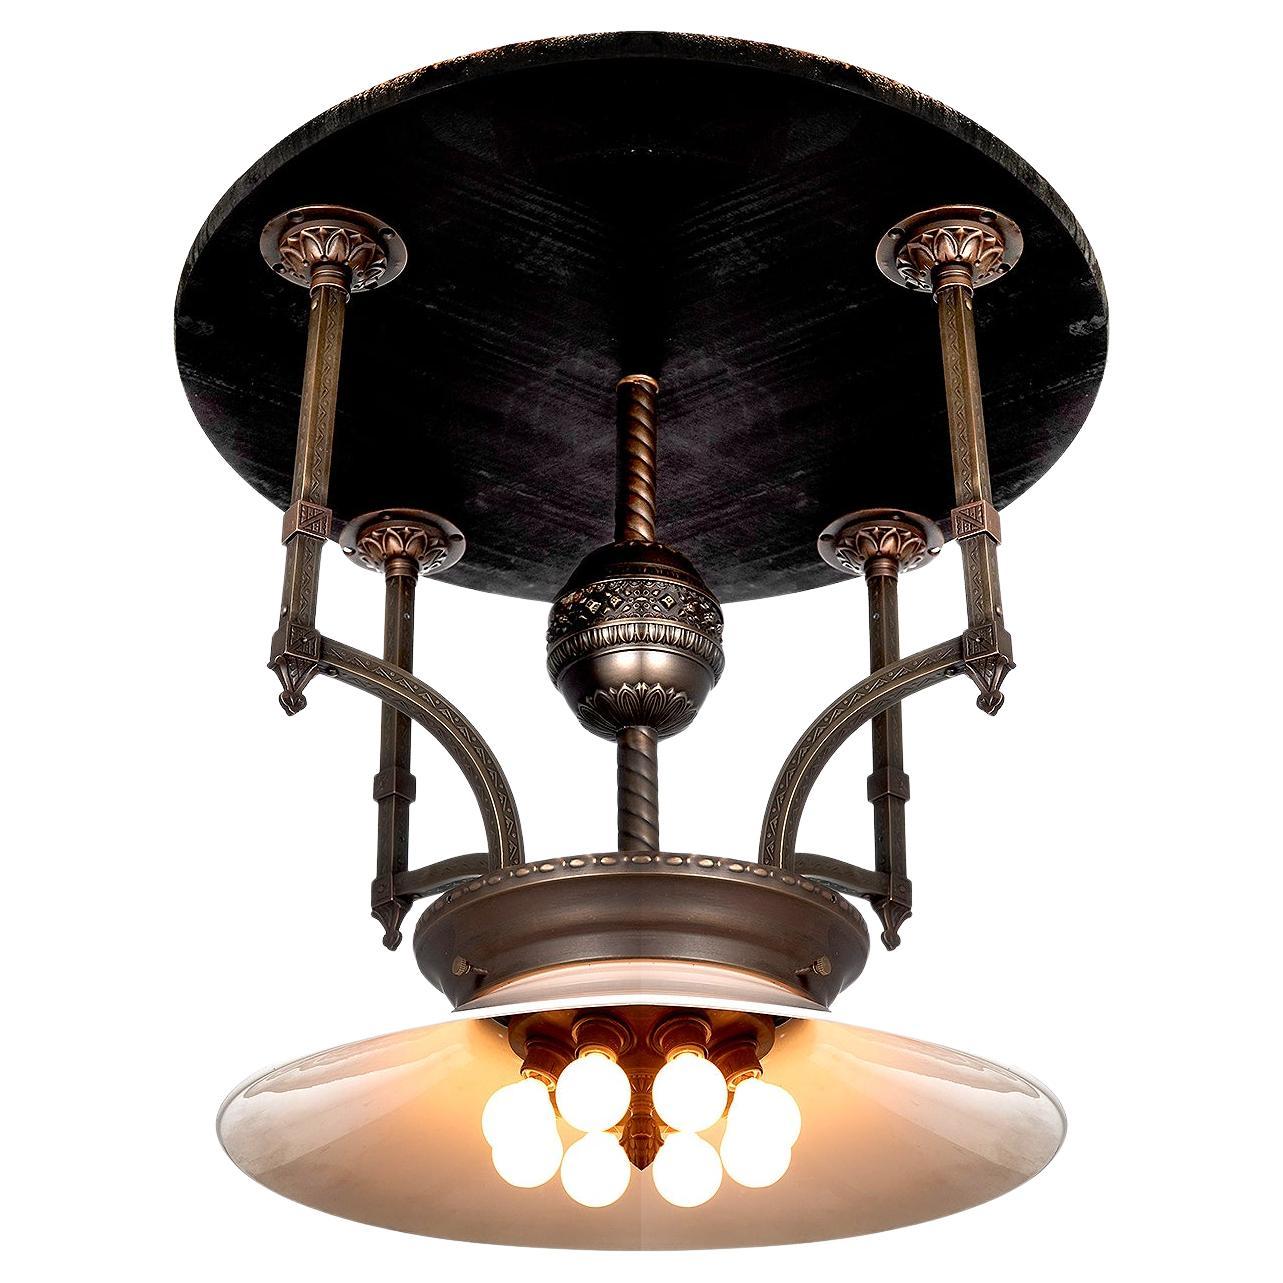 Early Railroad Center Lamp For Sale